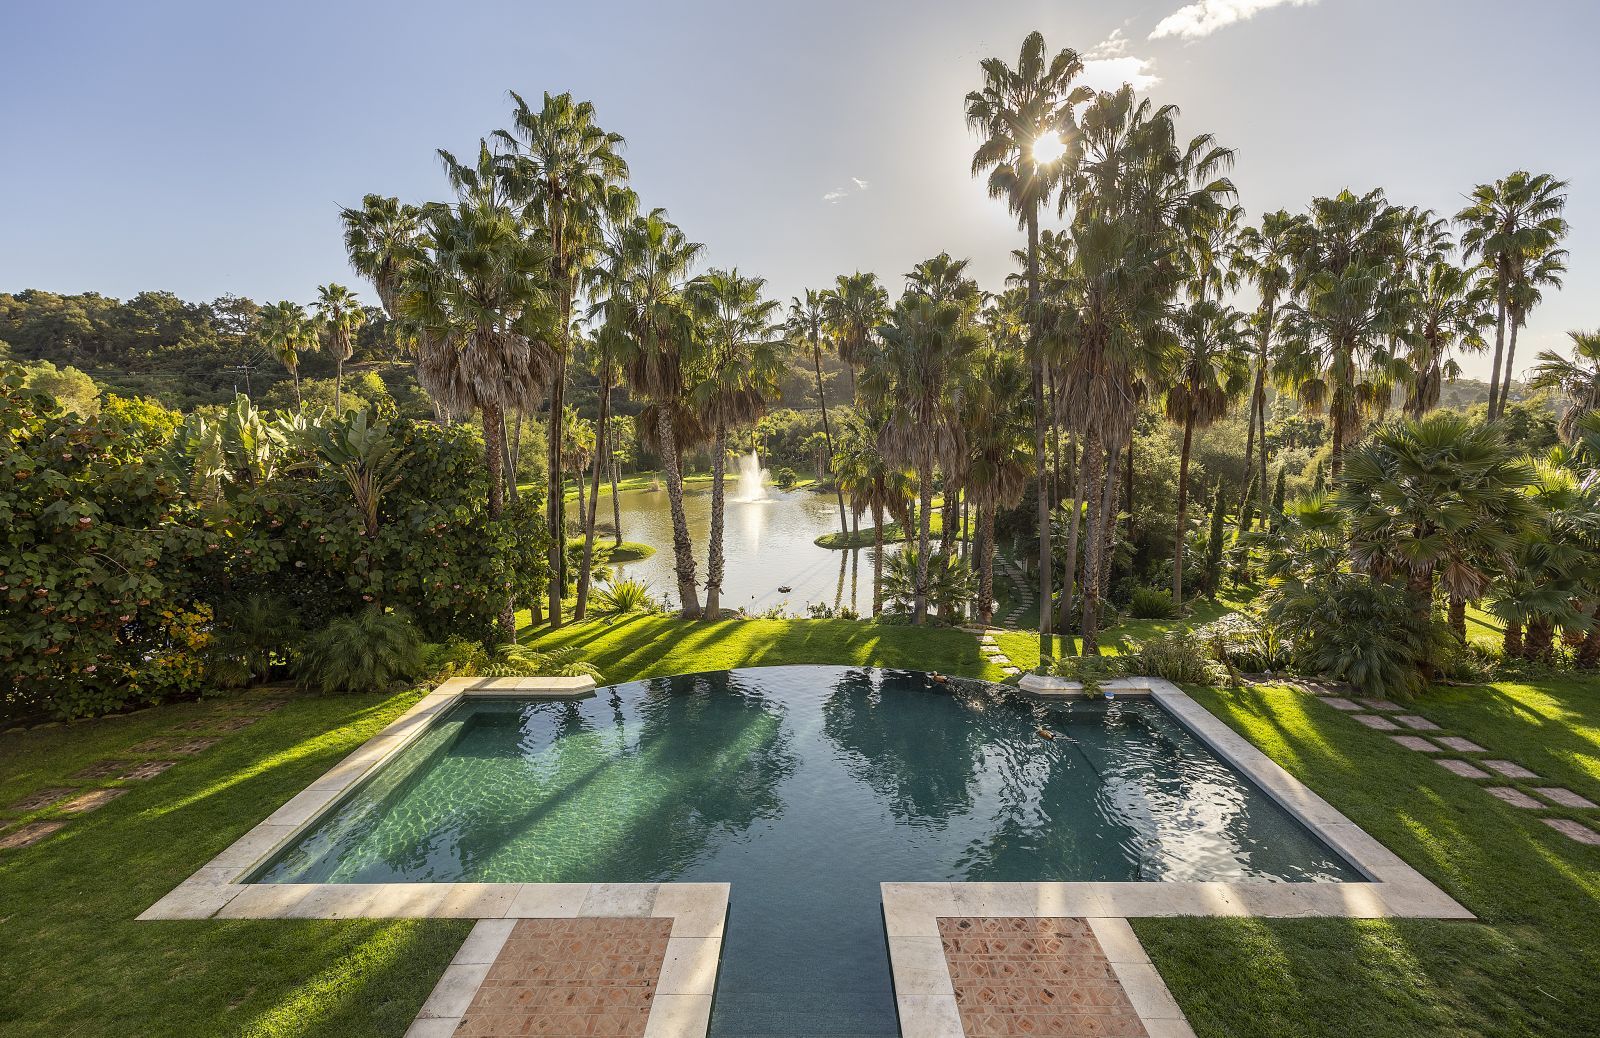 Palm trees stand tall at the foot of a pool that overlooks a substantial pond.